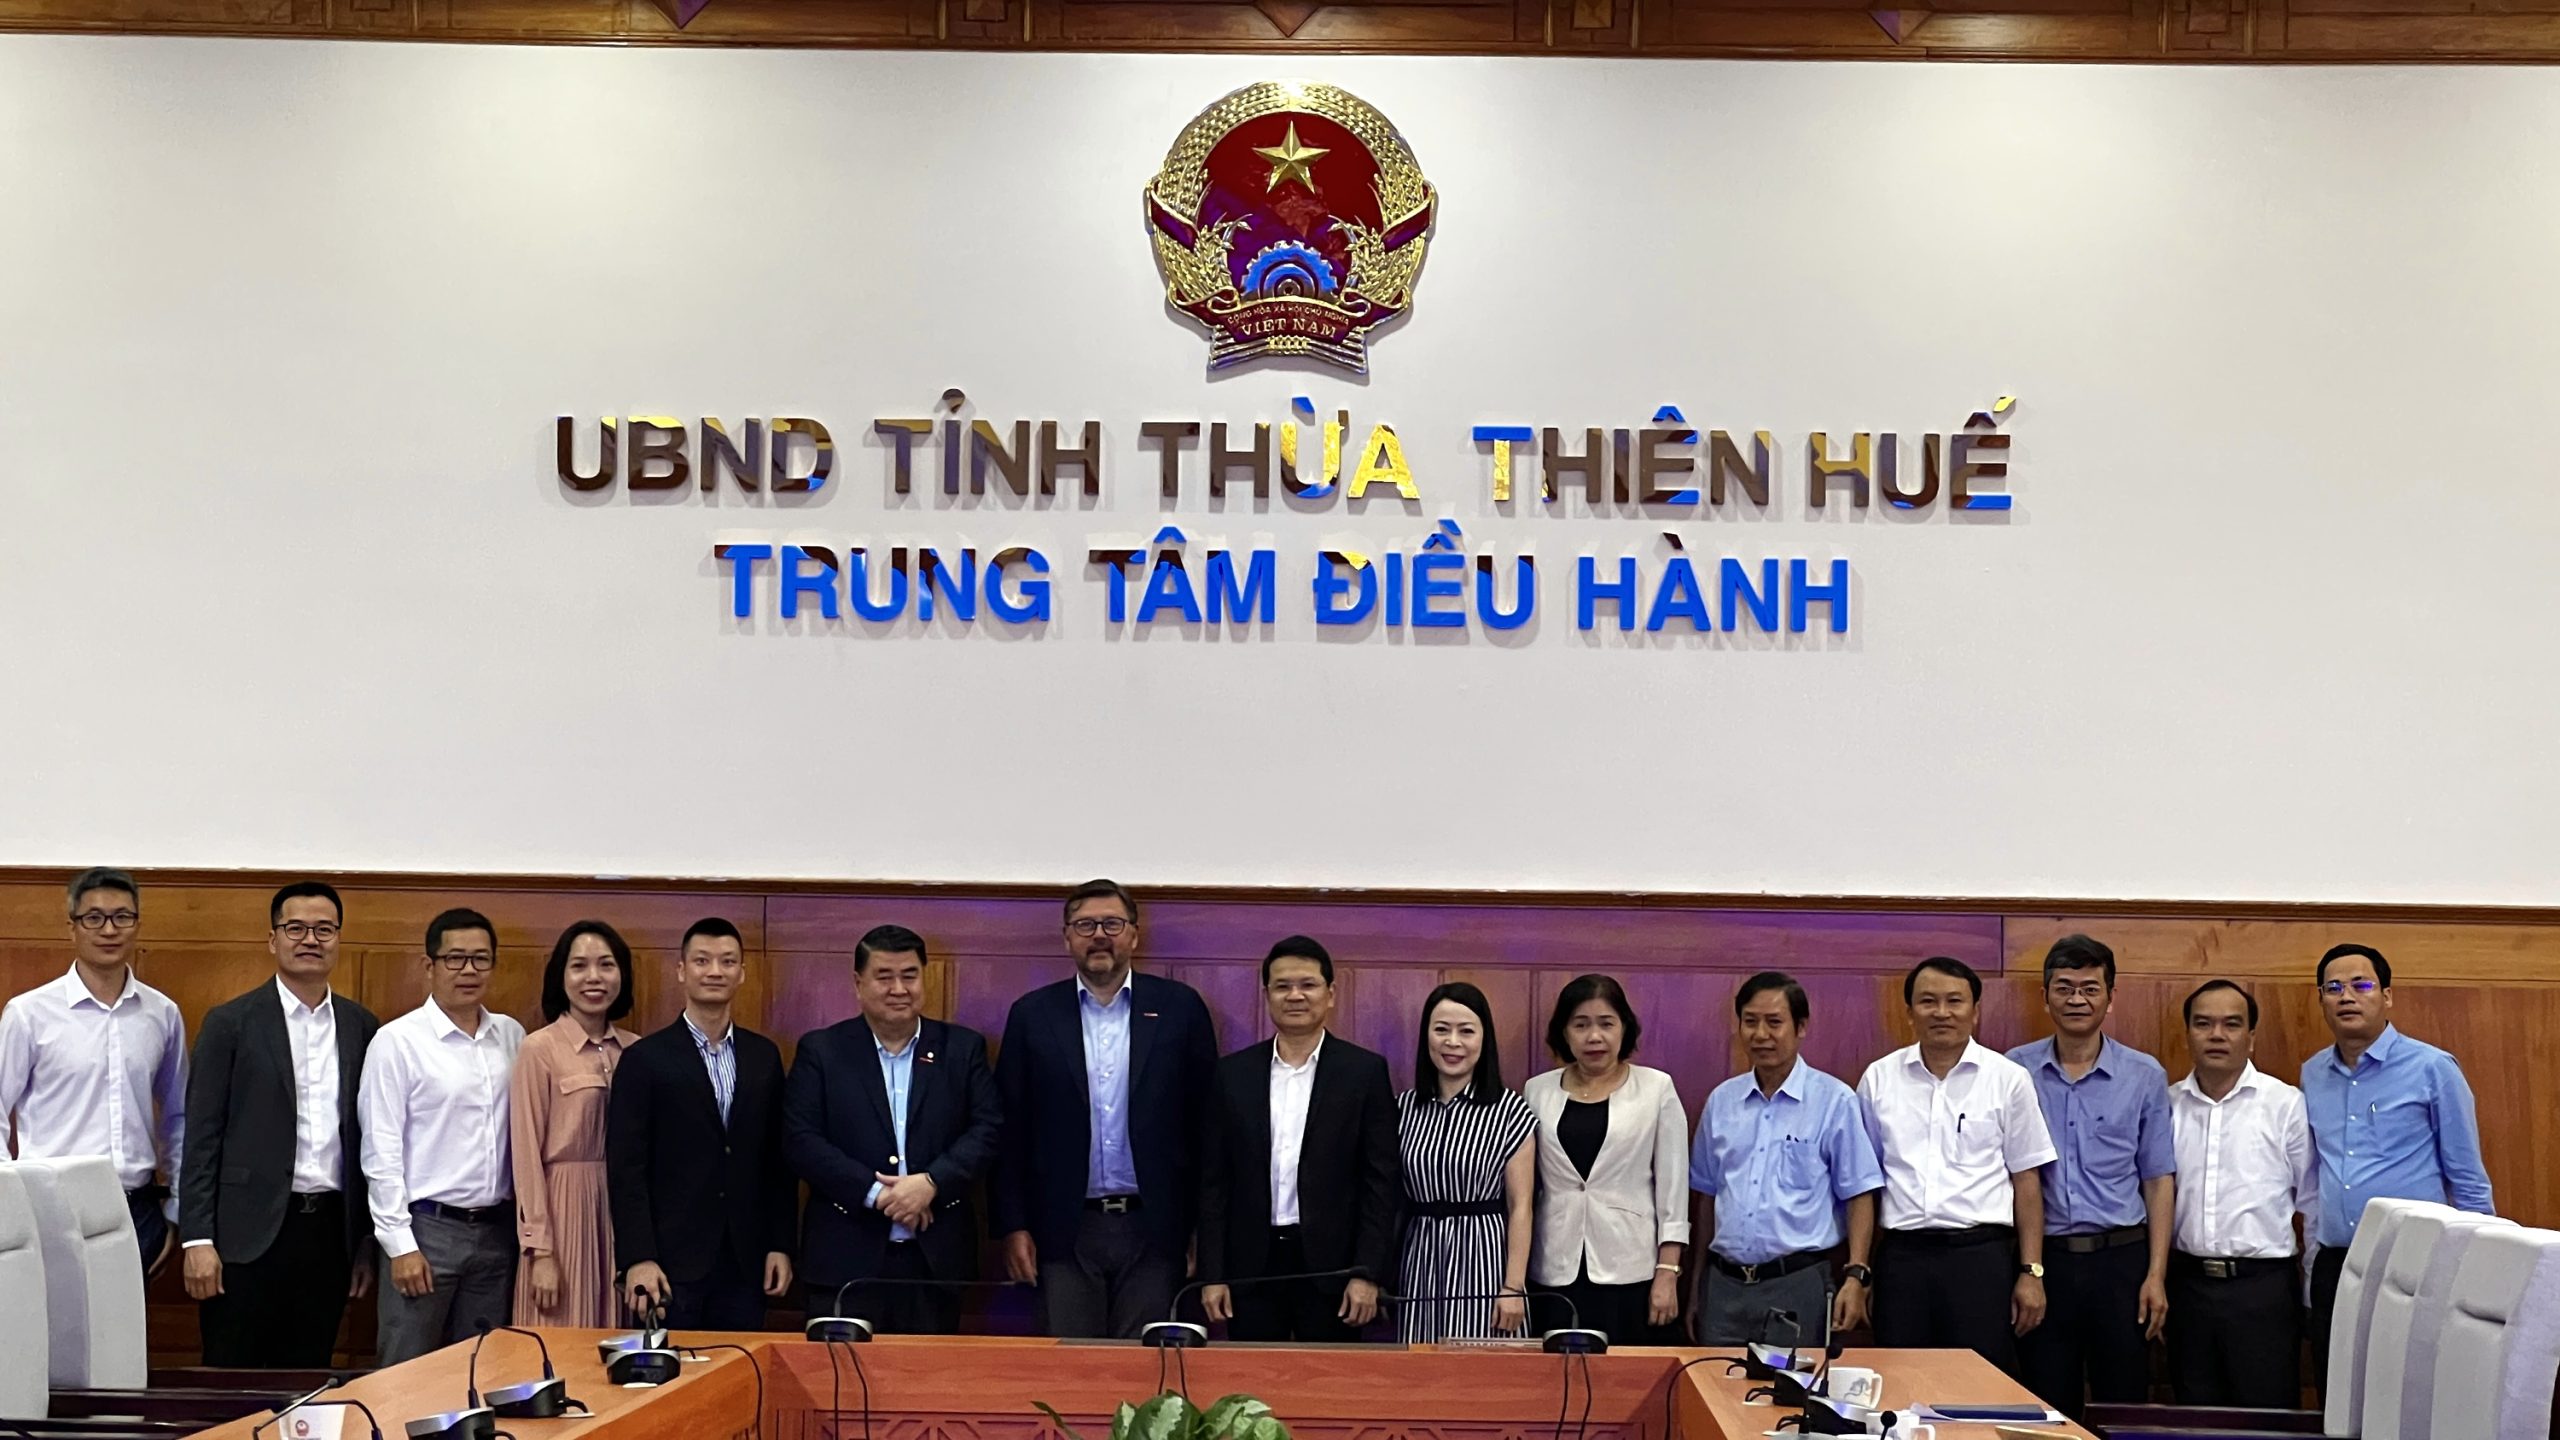 Central Retail in Vietnam meets with Leaders of the People’s Committee of Thua Thien Hue Province